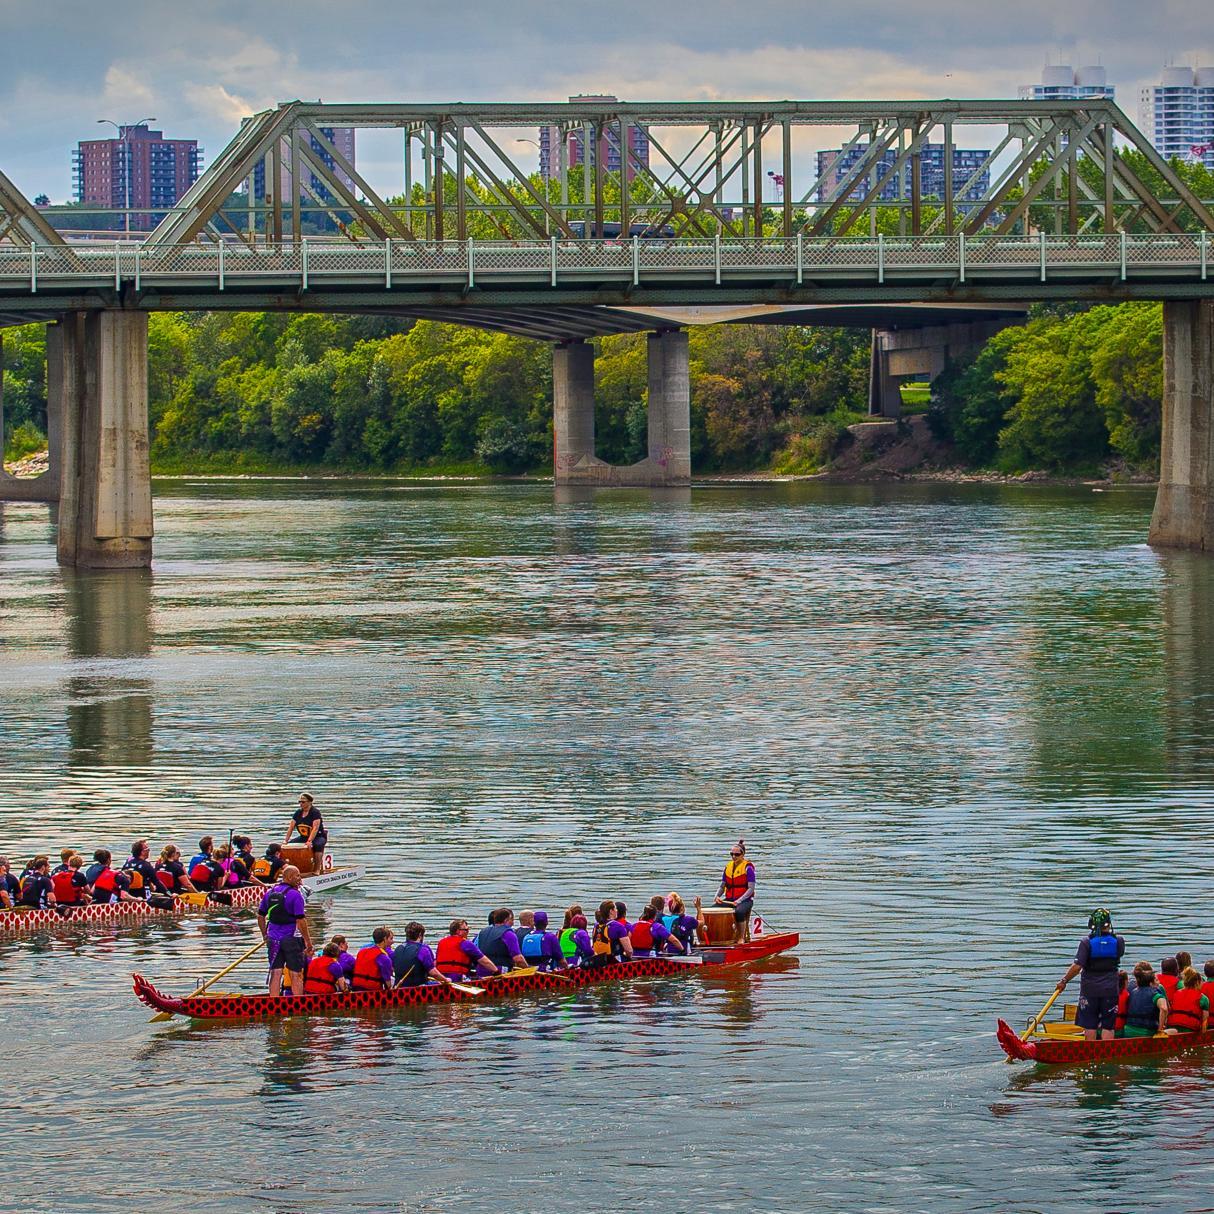 Dragon-boat team building in the River Valley